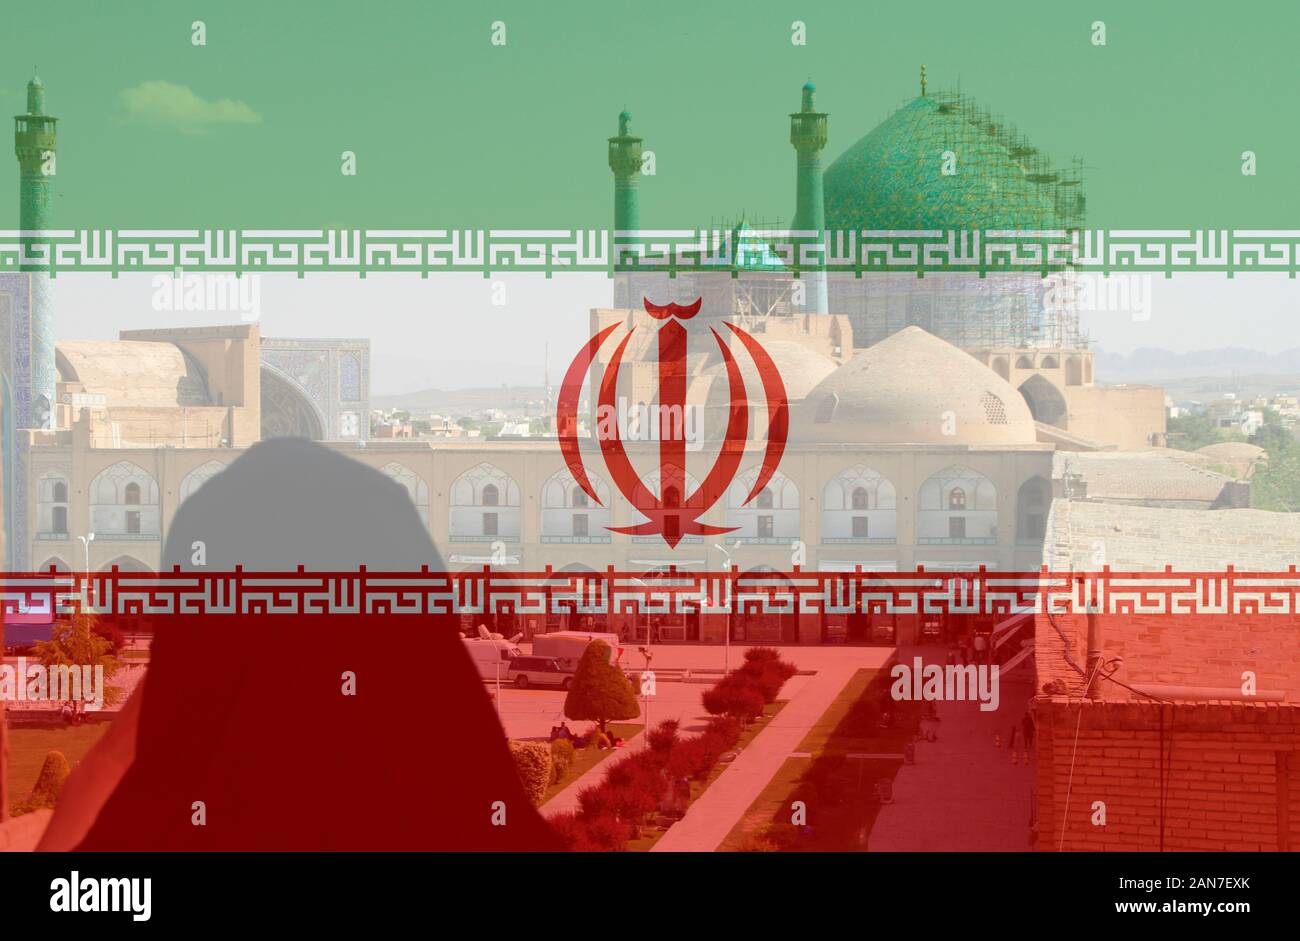 Big city square in Esfahan, Iran, with the Iranian national flag placed over it Stock Photo